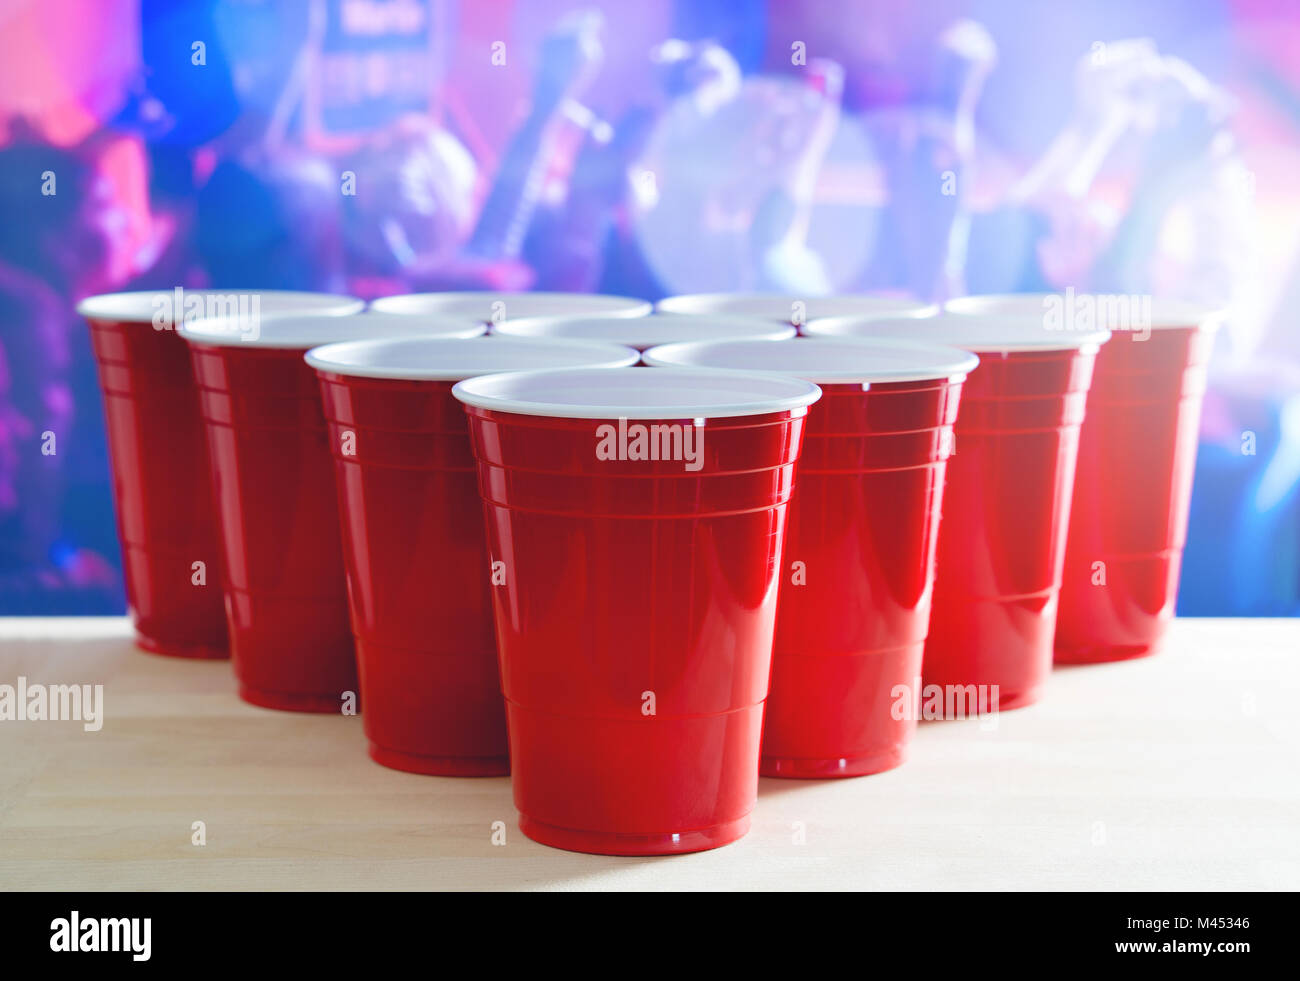 Beer pong tournament layout. Many red party cups in a nightclub full of people dancing on the dance floor in the background. Perfect for marketing. Stock Photo